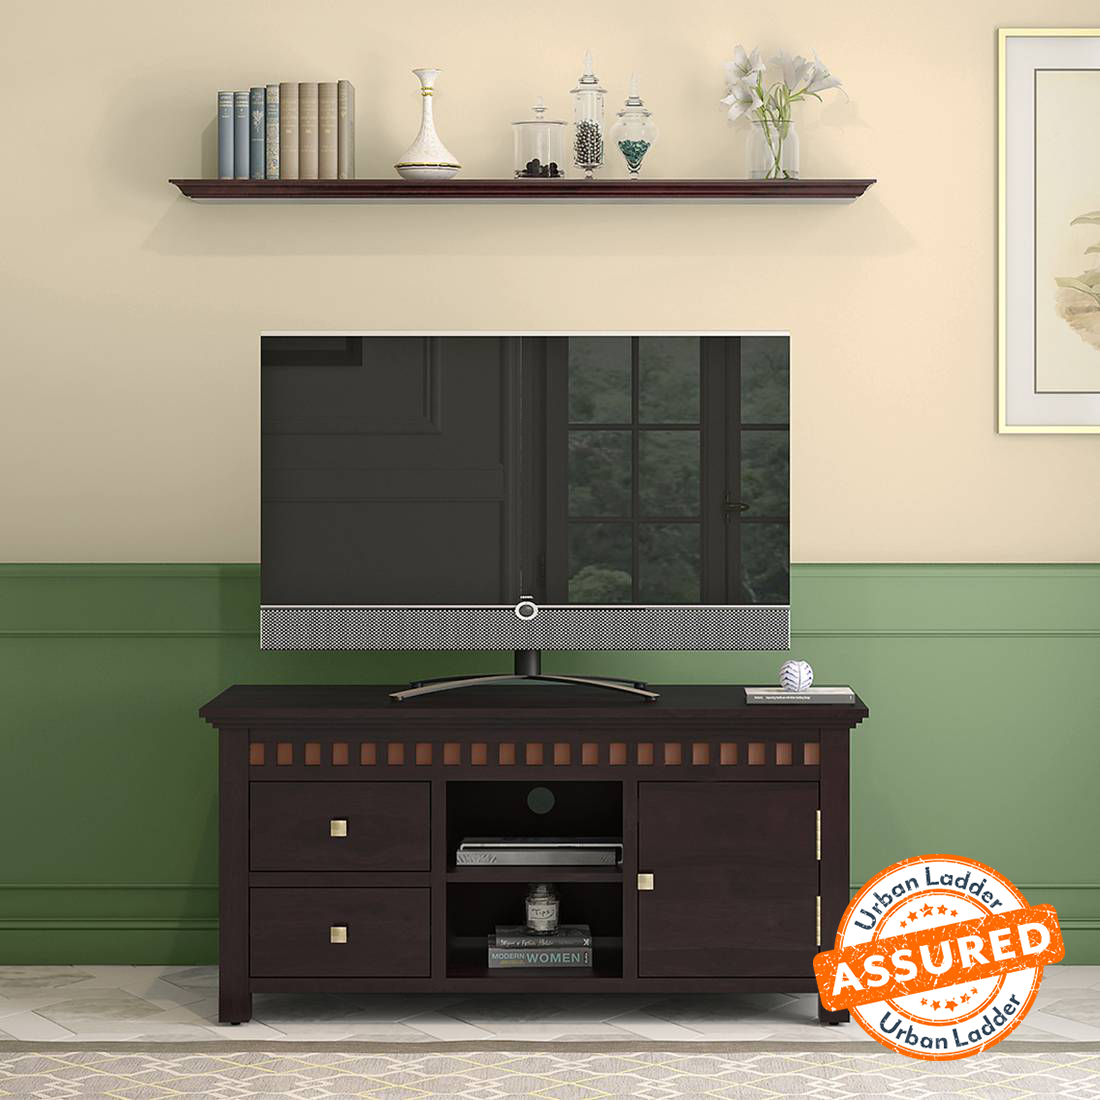 Up to 70% off on 200+ TV Unit Designs | Full House Sale - Urban Ladder